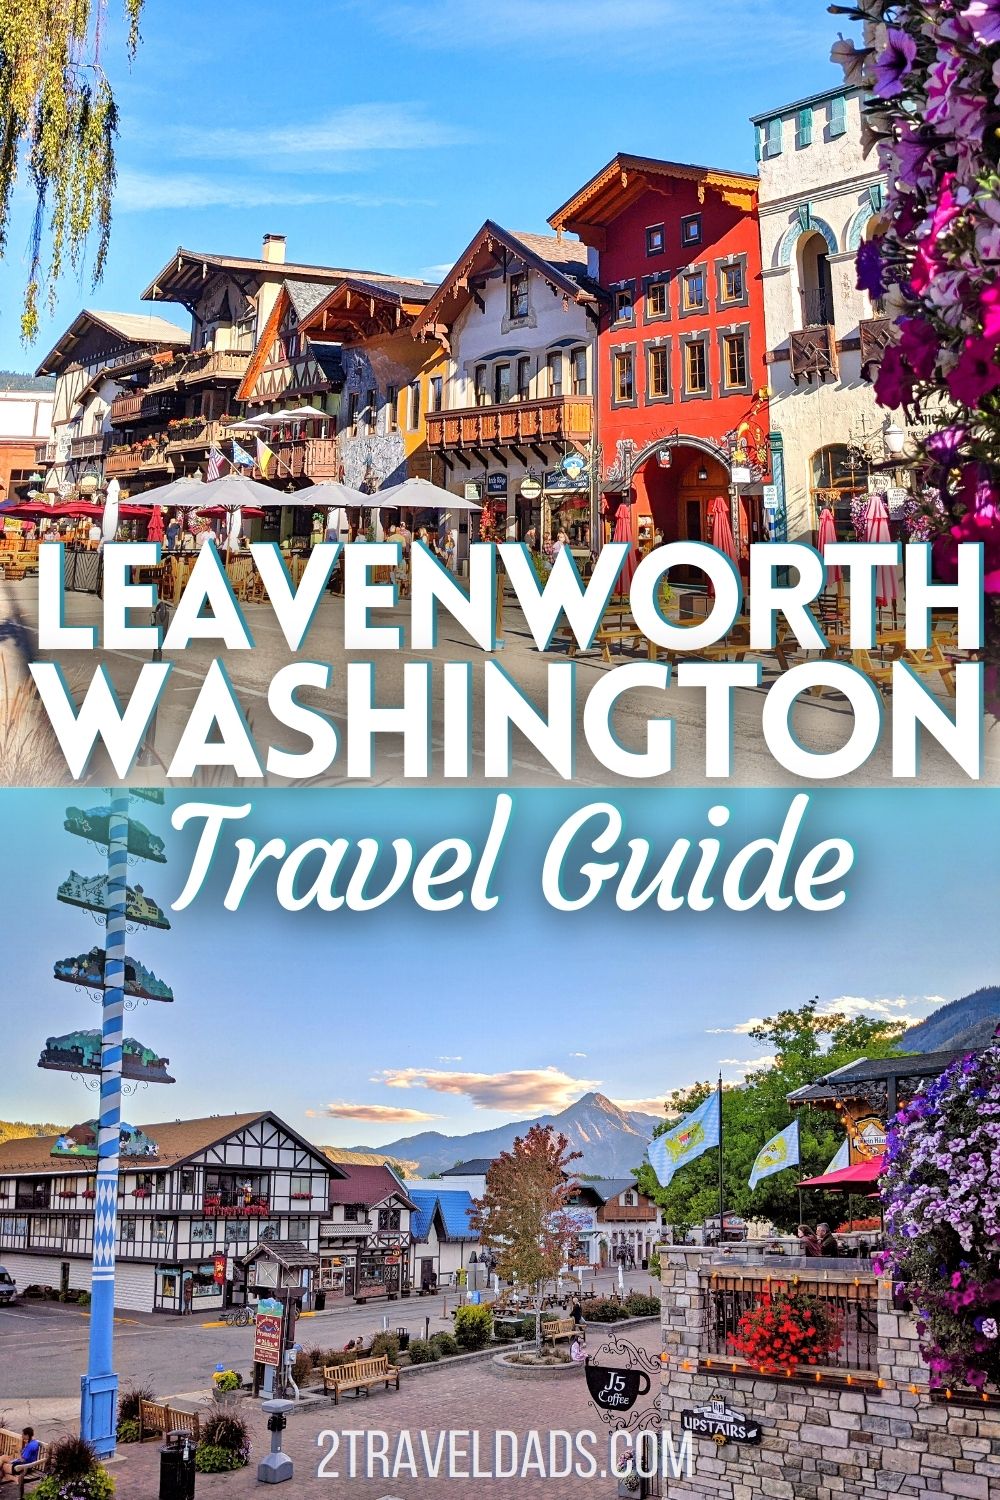 The best things to do in Leavenworth, Washington are Bavarian, outdoorsy and uniquely Pacific Northwest. Find out more about the fun lodges and camping options, unique tourist activities, and great food that make it a year round vacation destination.